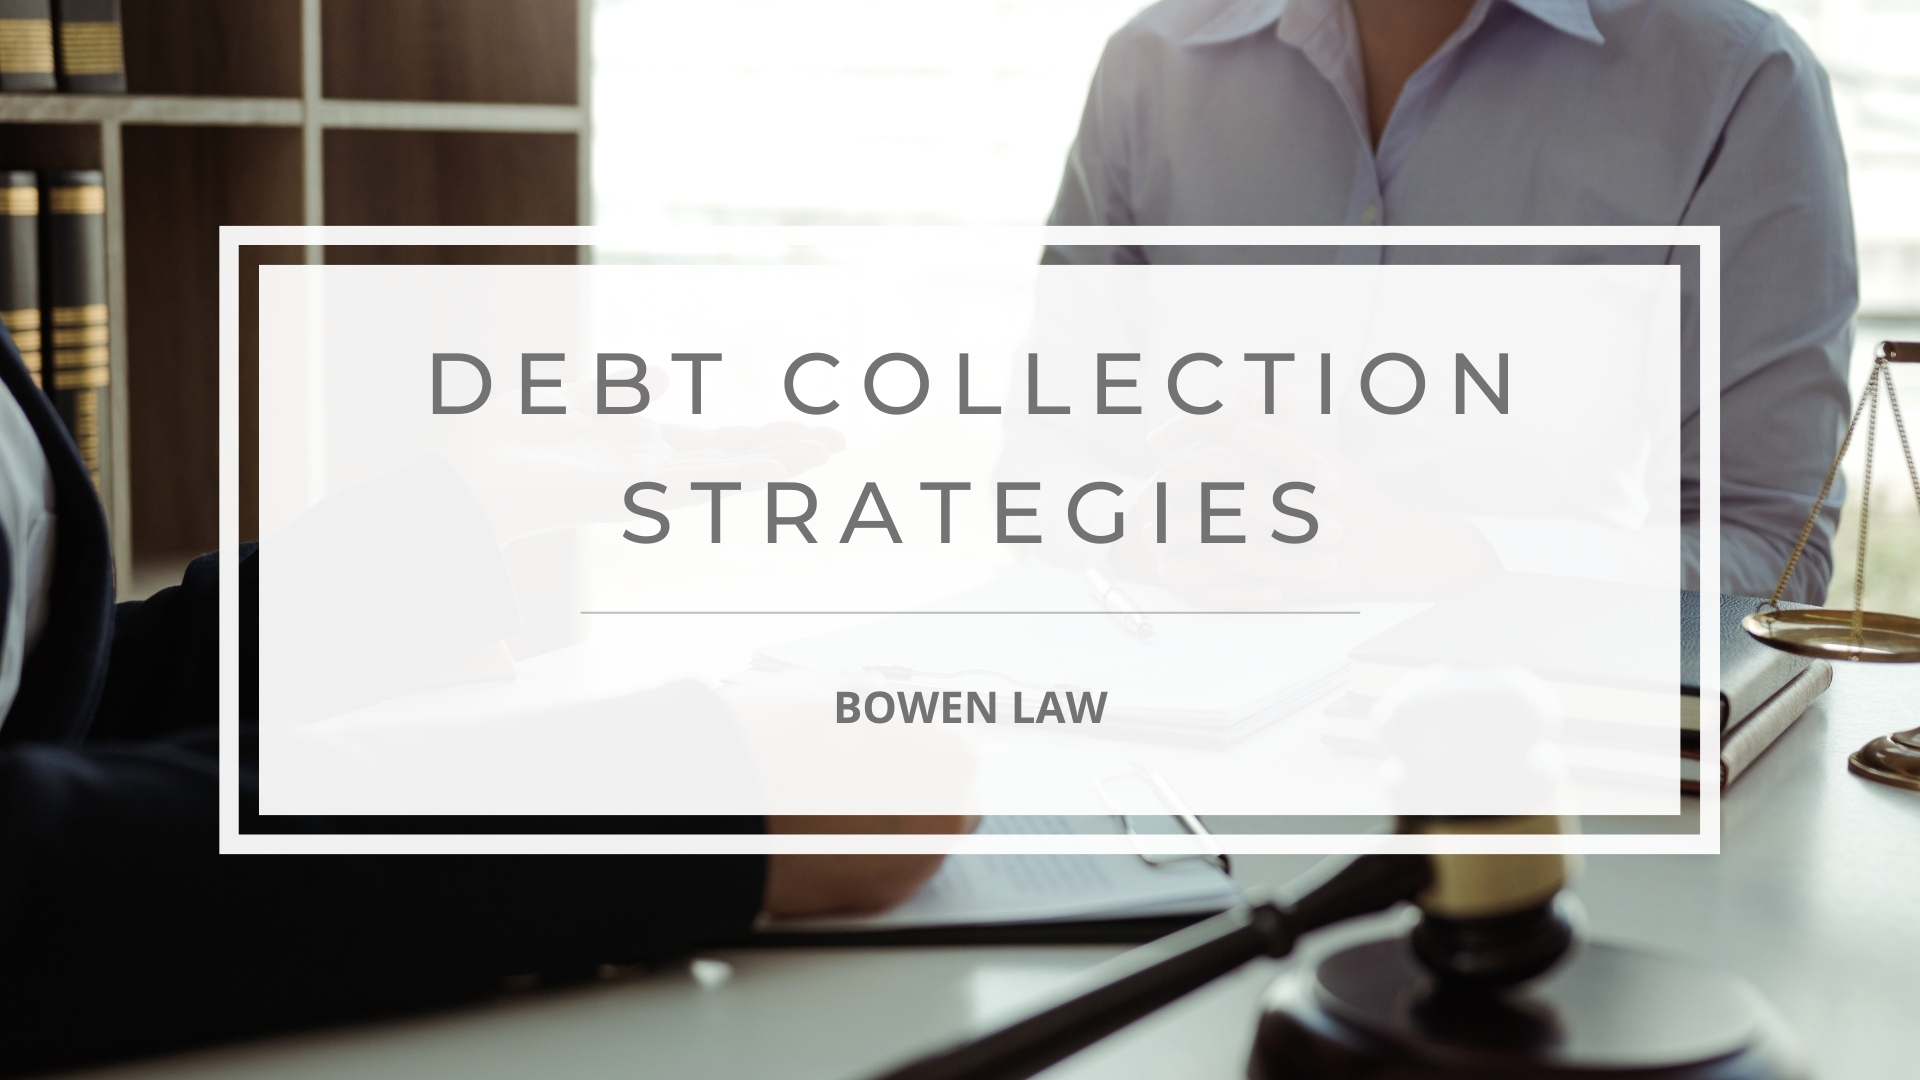 Featured image of debt collection strategies